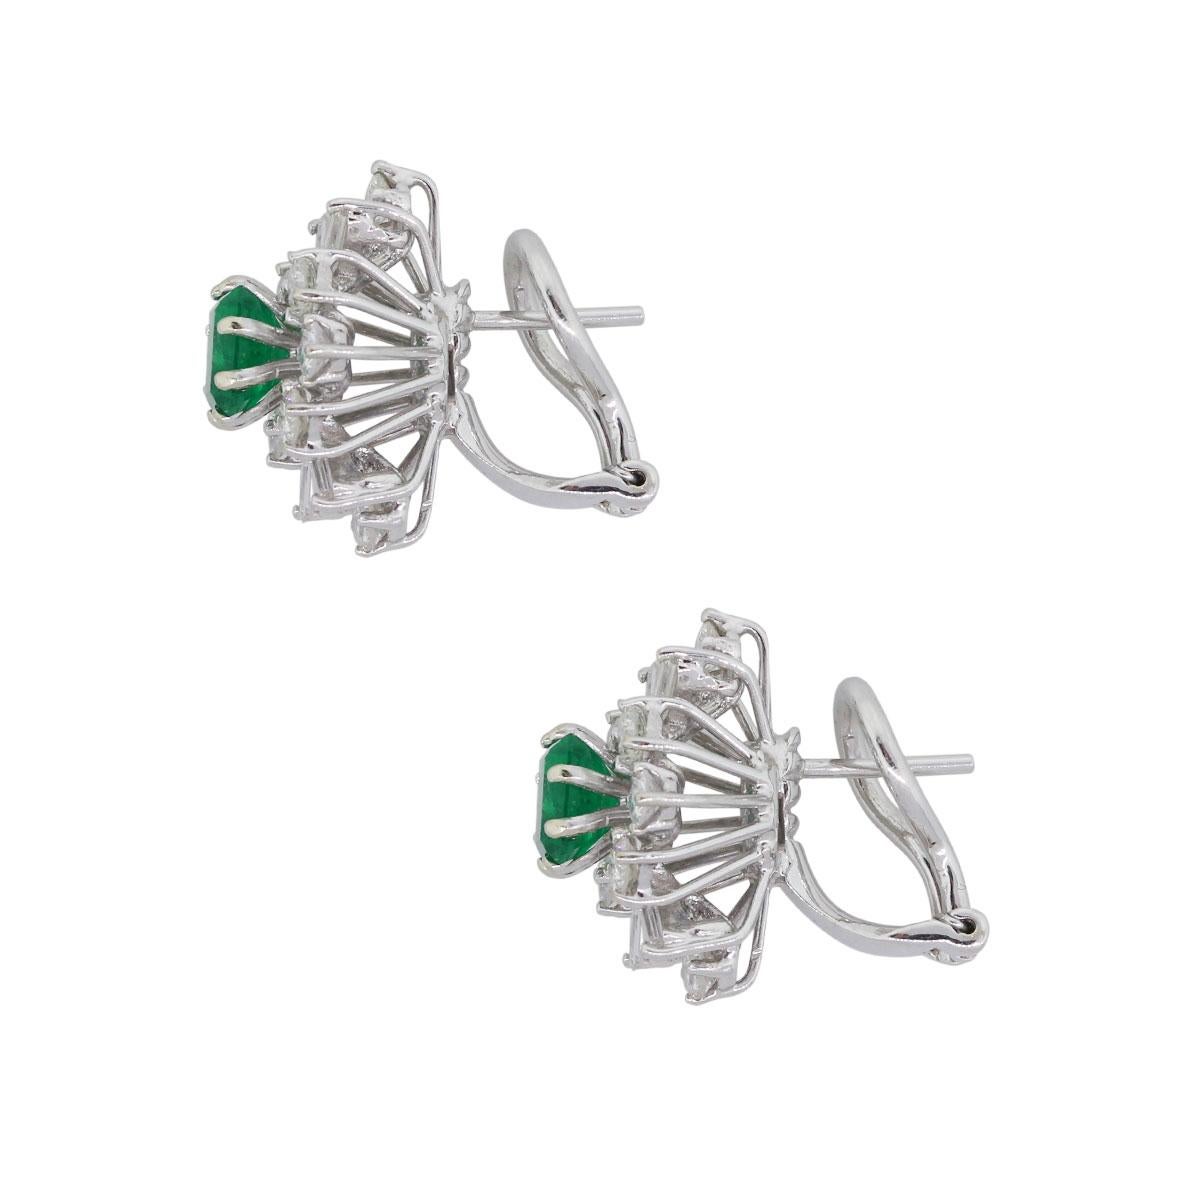 Material: 18k white gold
Gemstone Details: Approximately 1.70ctw of emerald shape emeralds.
Diamond Details: Approximately 1.05ctw of round and baguette shape diamonds. Diamonds are G/H in color and VS-SI in clarity.
Earring Measurements: 0.78″ x